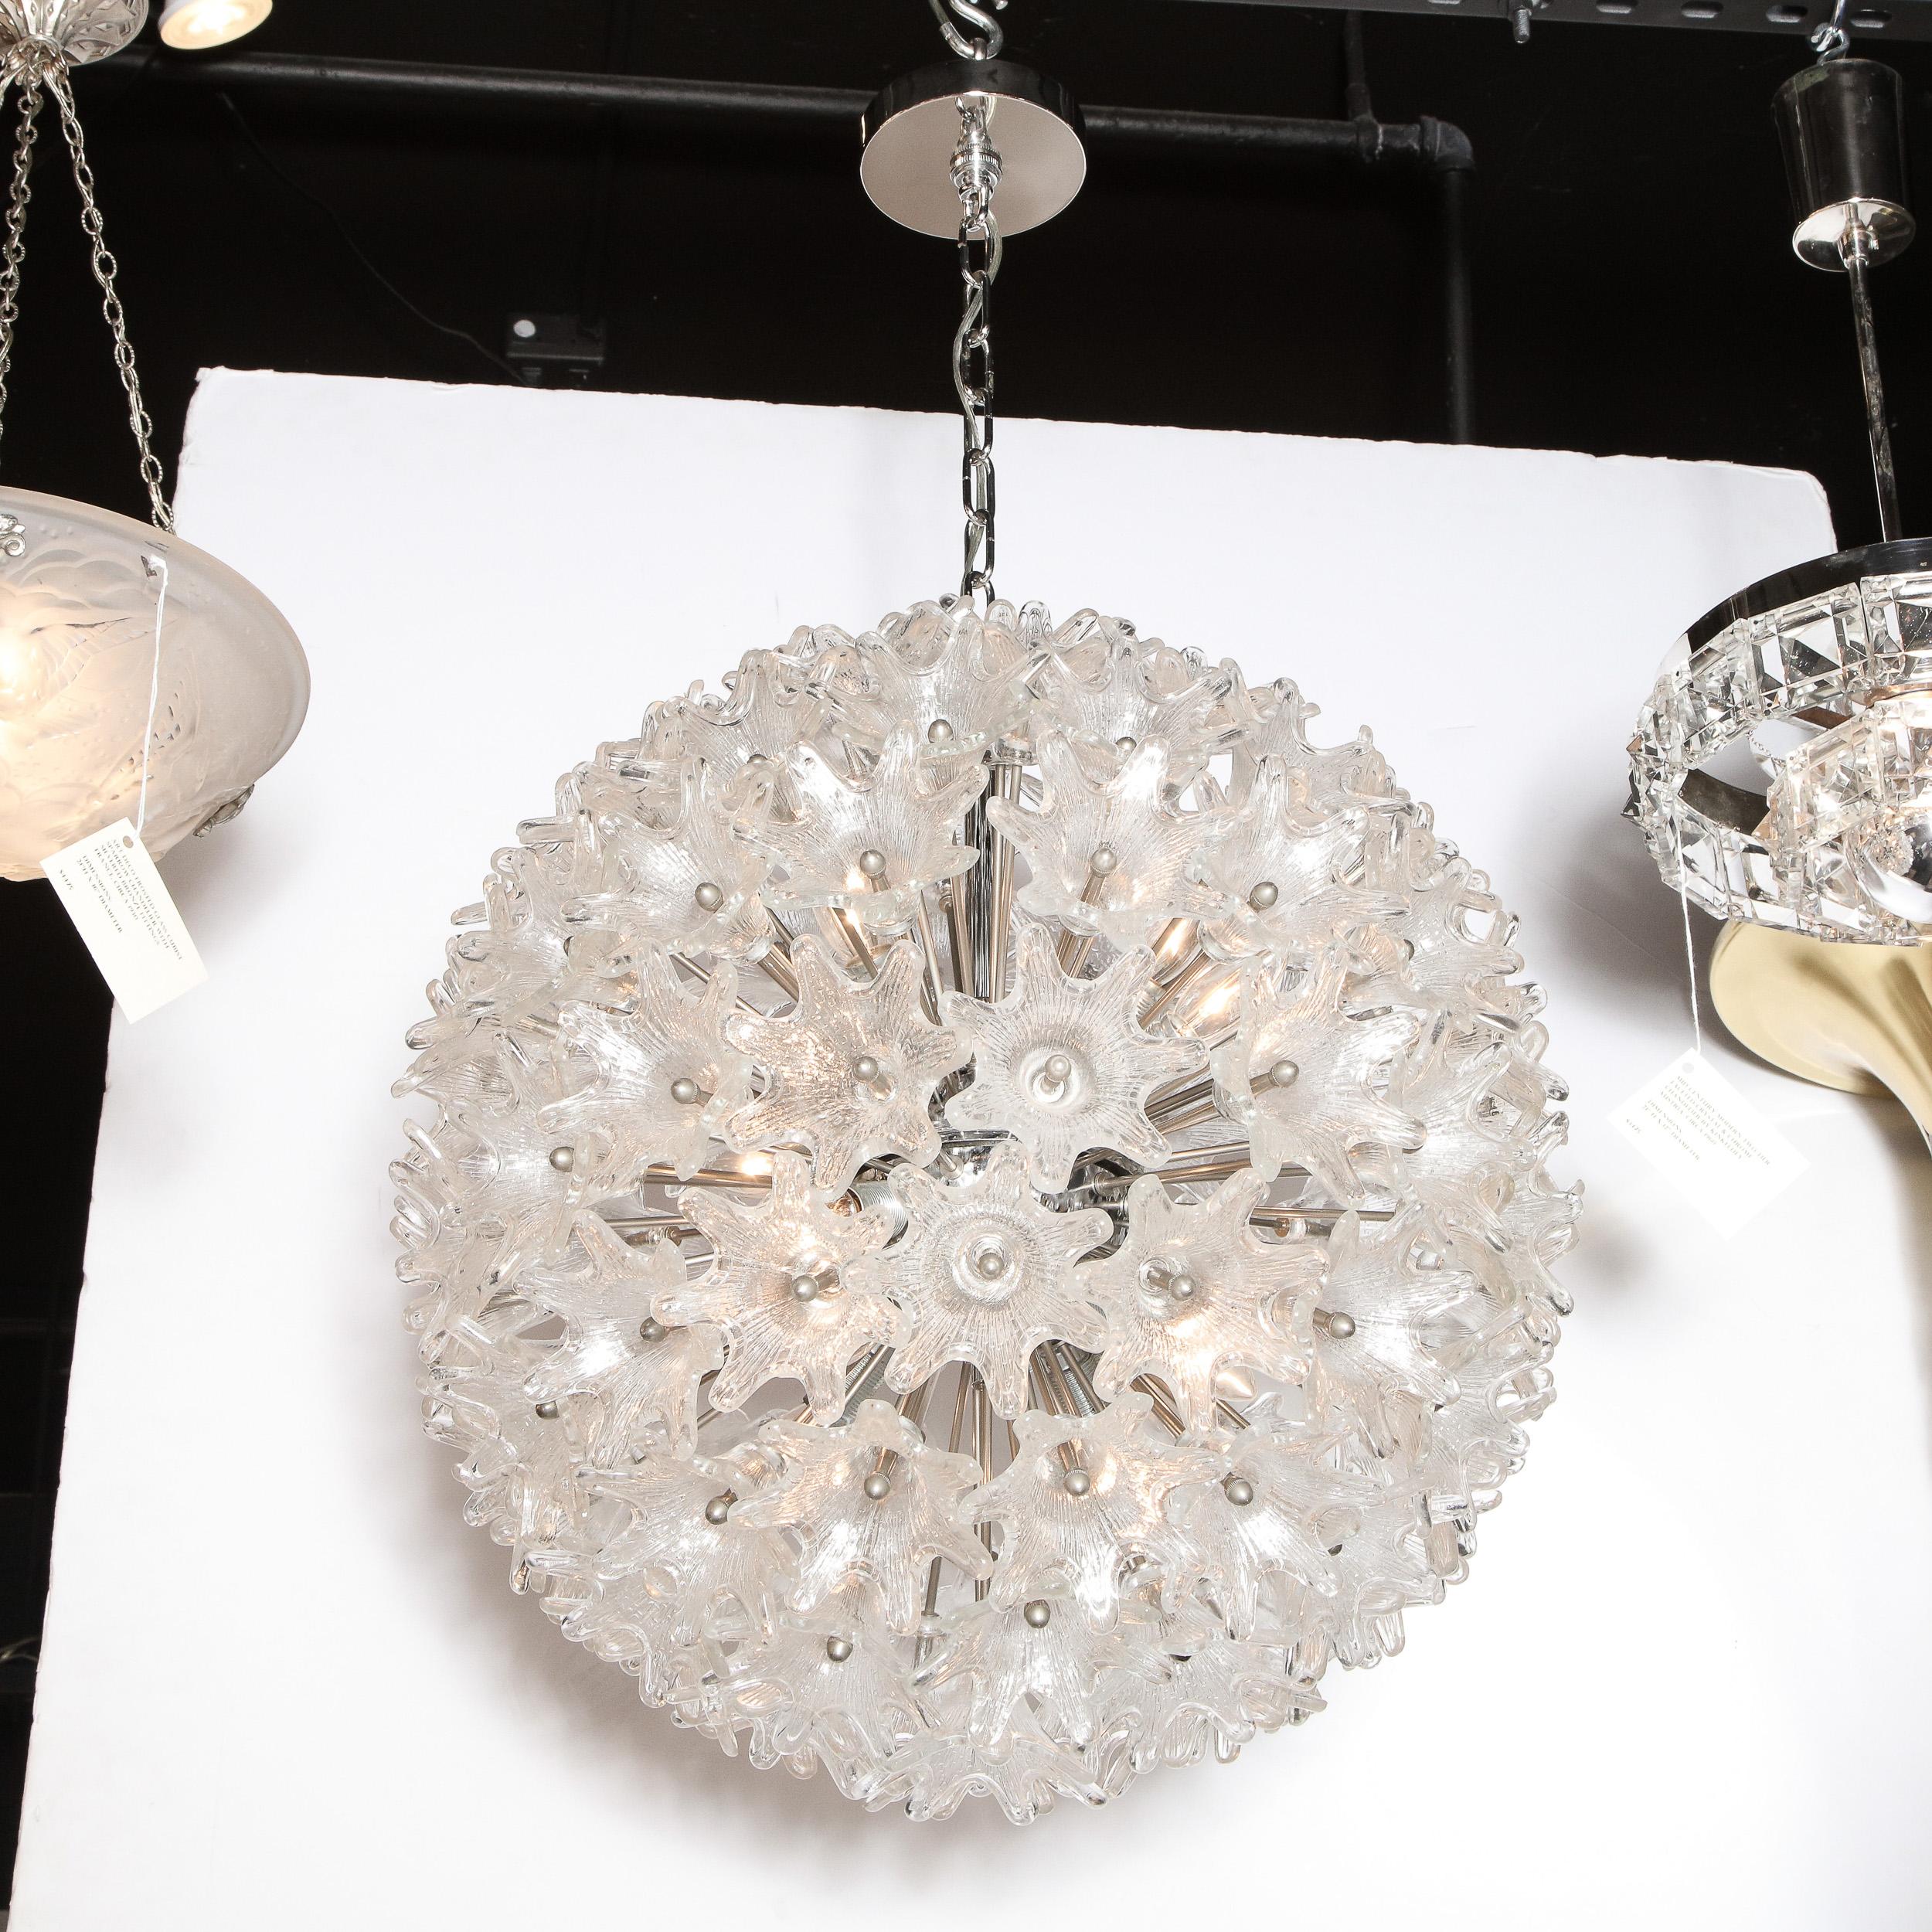 This graphic and refined Mid-Century Modern Sputnik chandelier was realized in Italy, circa 1970. Created in the manner of Rupert Nikoll, the chandelier features a chrome body with an abundance of stylized and abstracted floral shades in striated